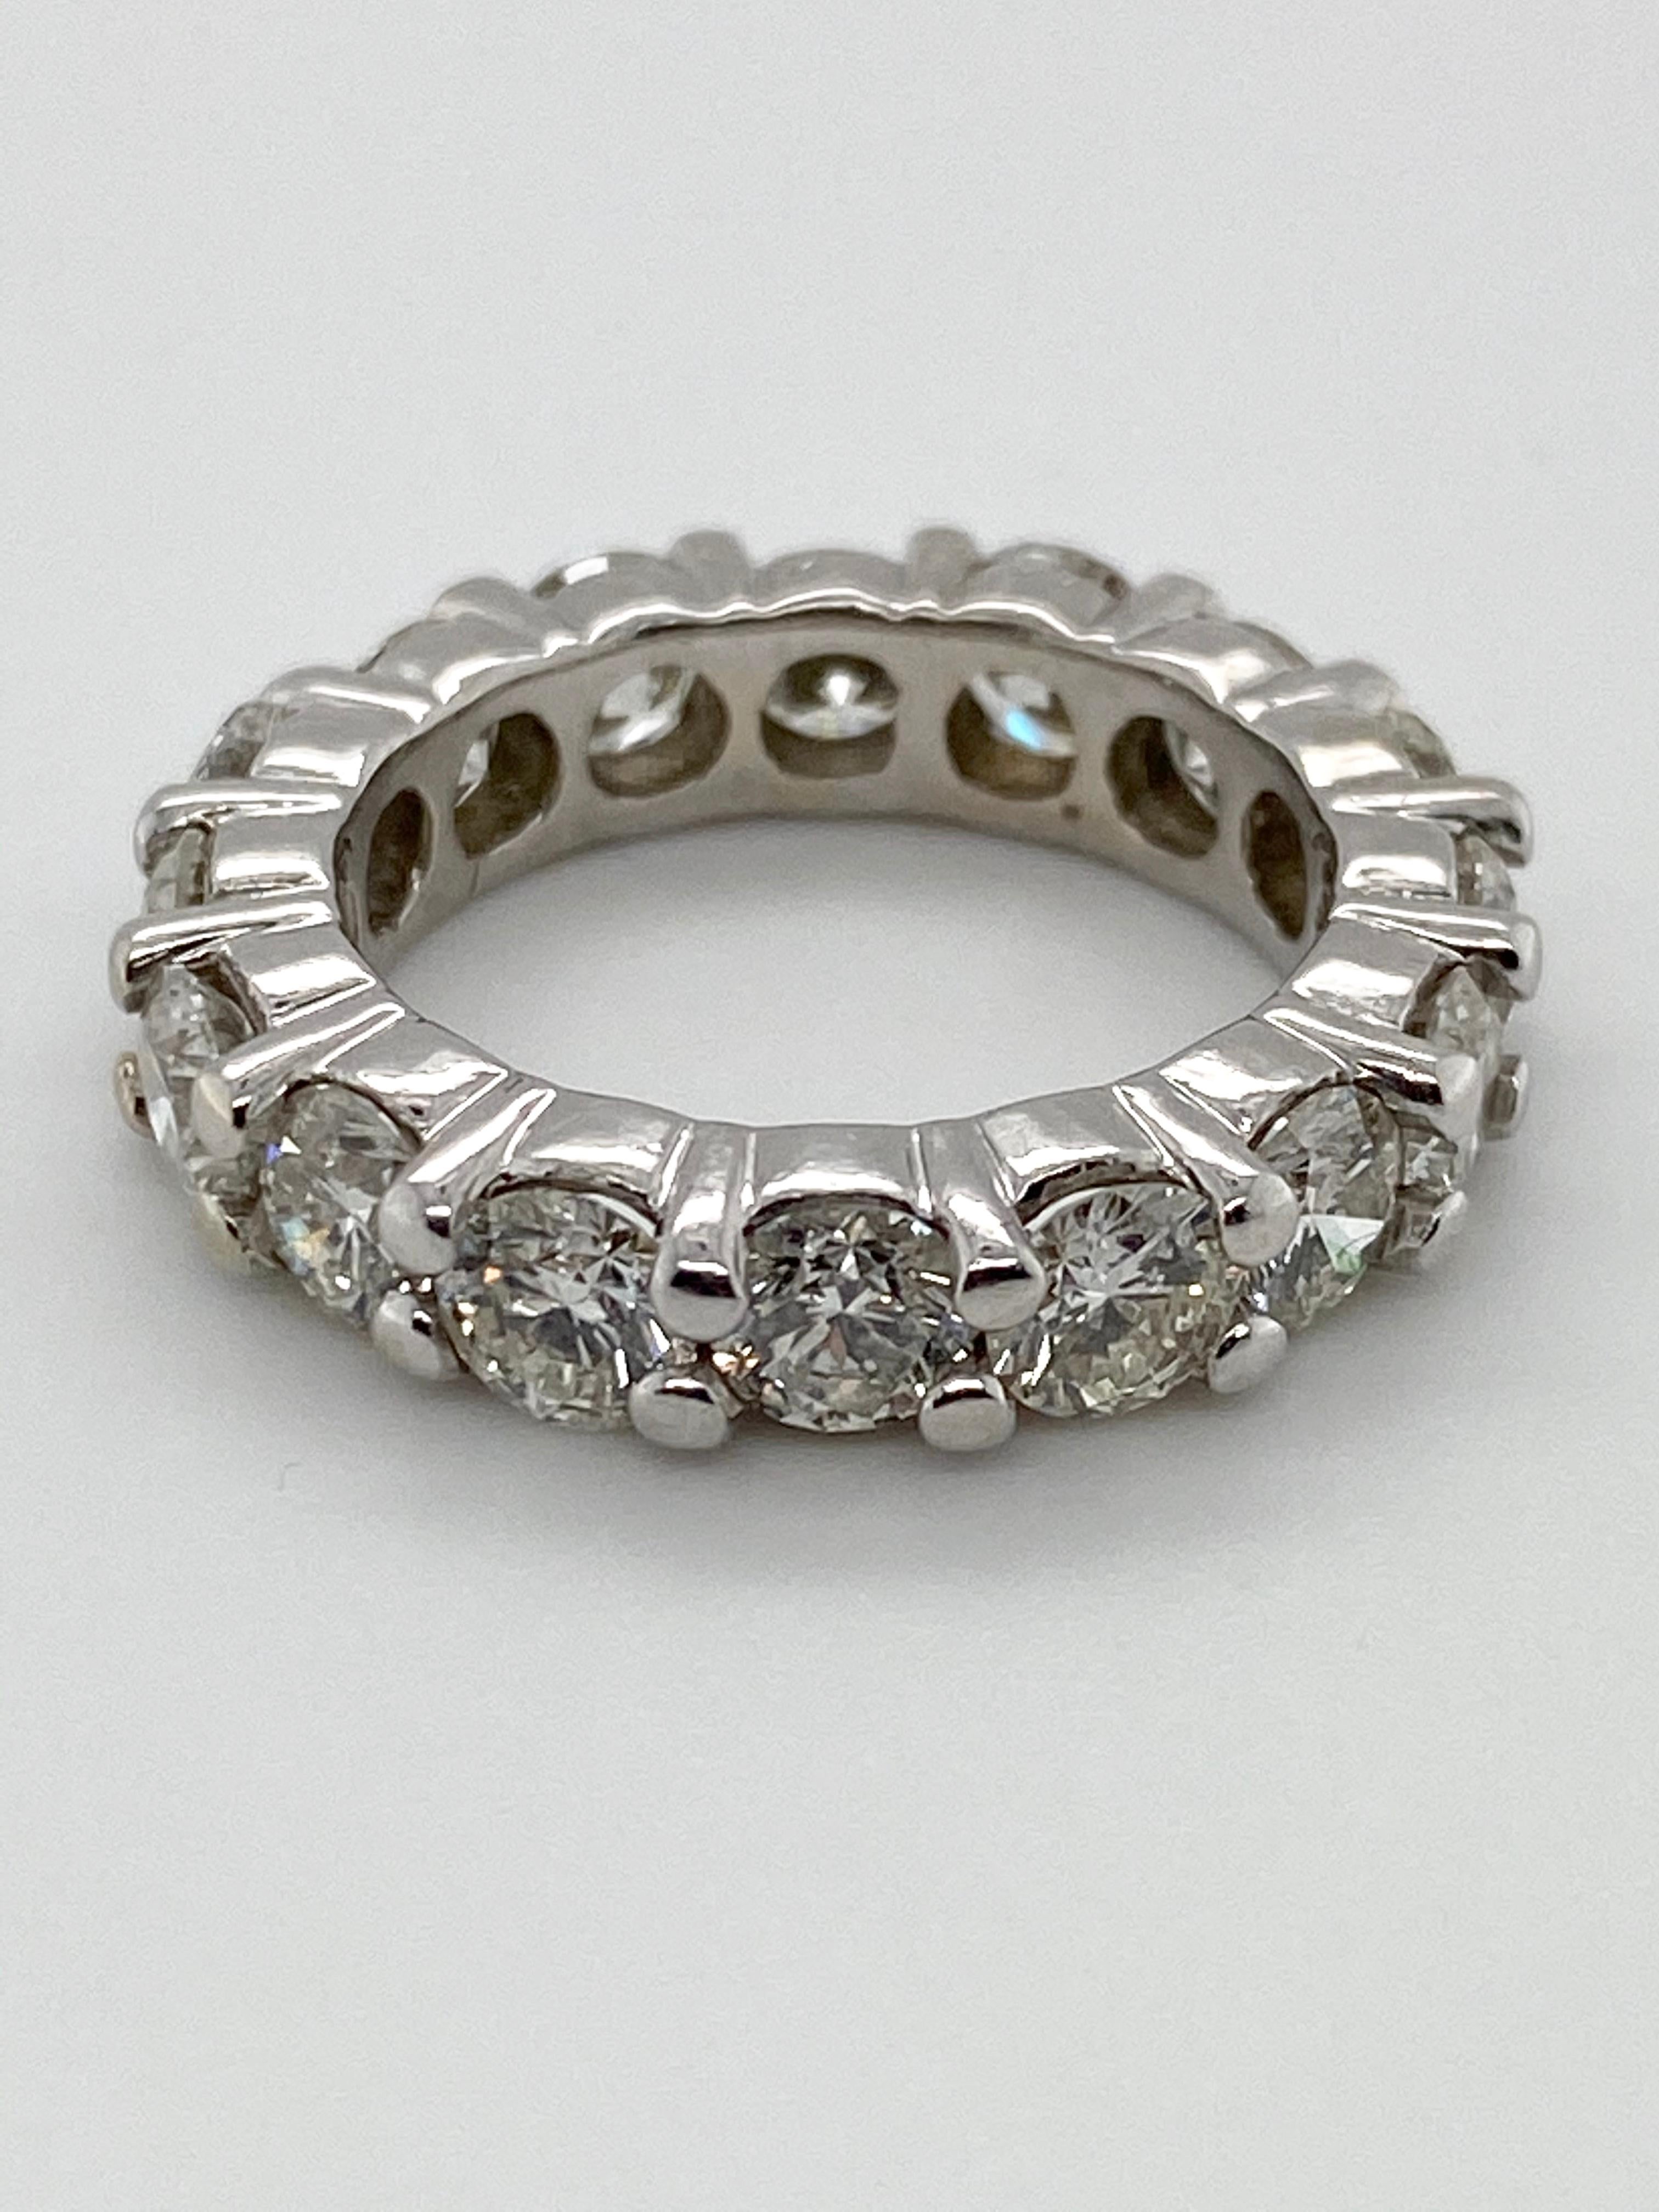 A classic white gold eternity band set with 16 round brilliant diamonds of approximately 5cts total weight.  This band was designed with consecutive diamonds set at slightly differing heights, creating an interesting visual contour when viewed from